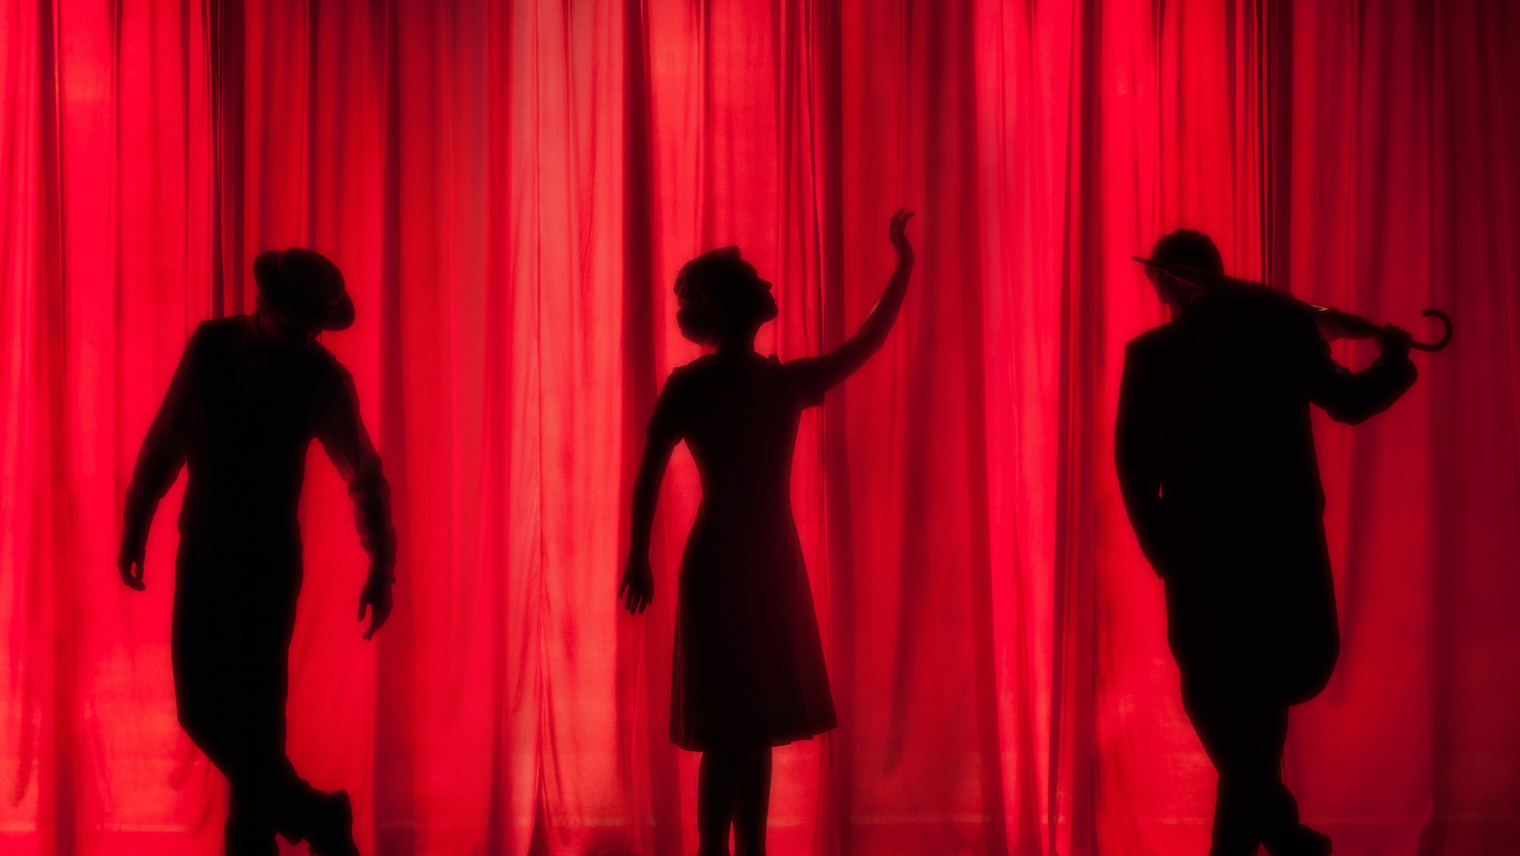 A theatre show - actors behind a red curtain